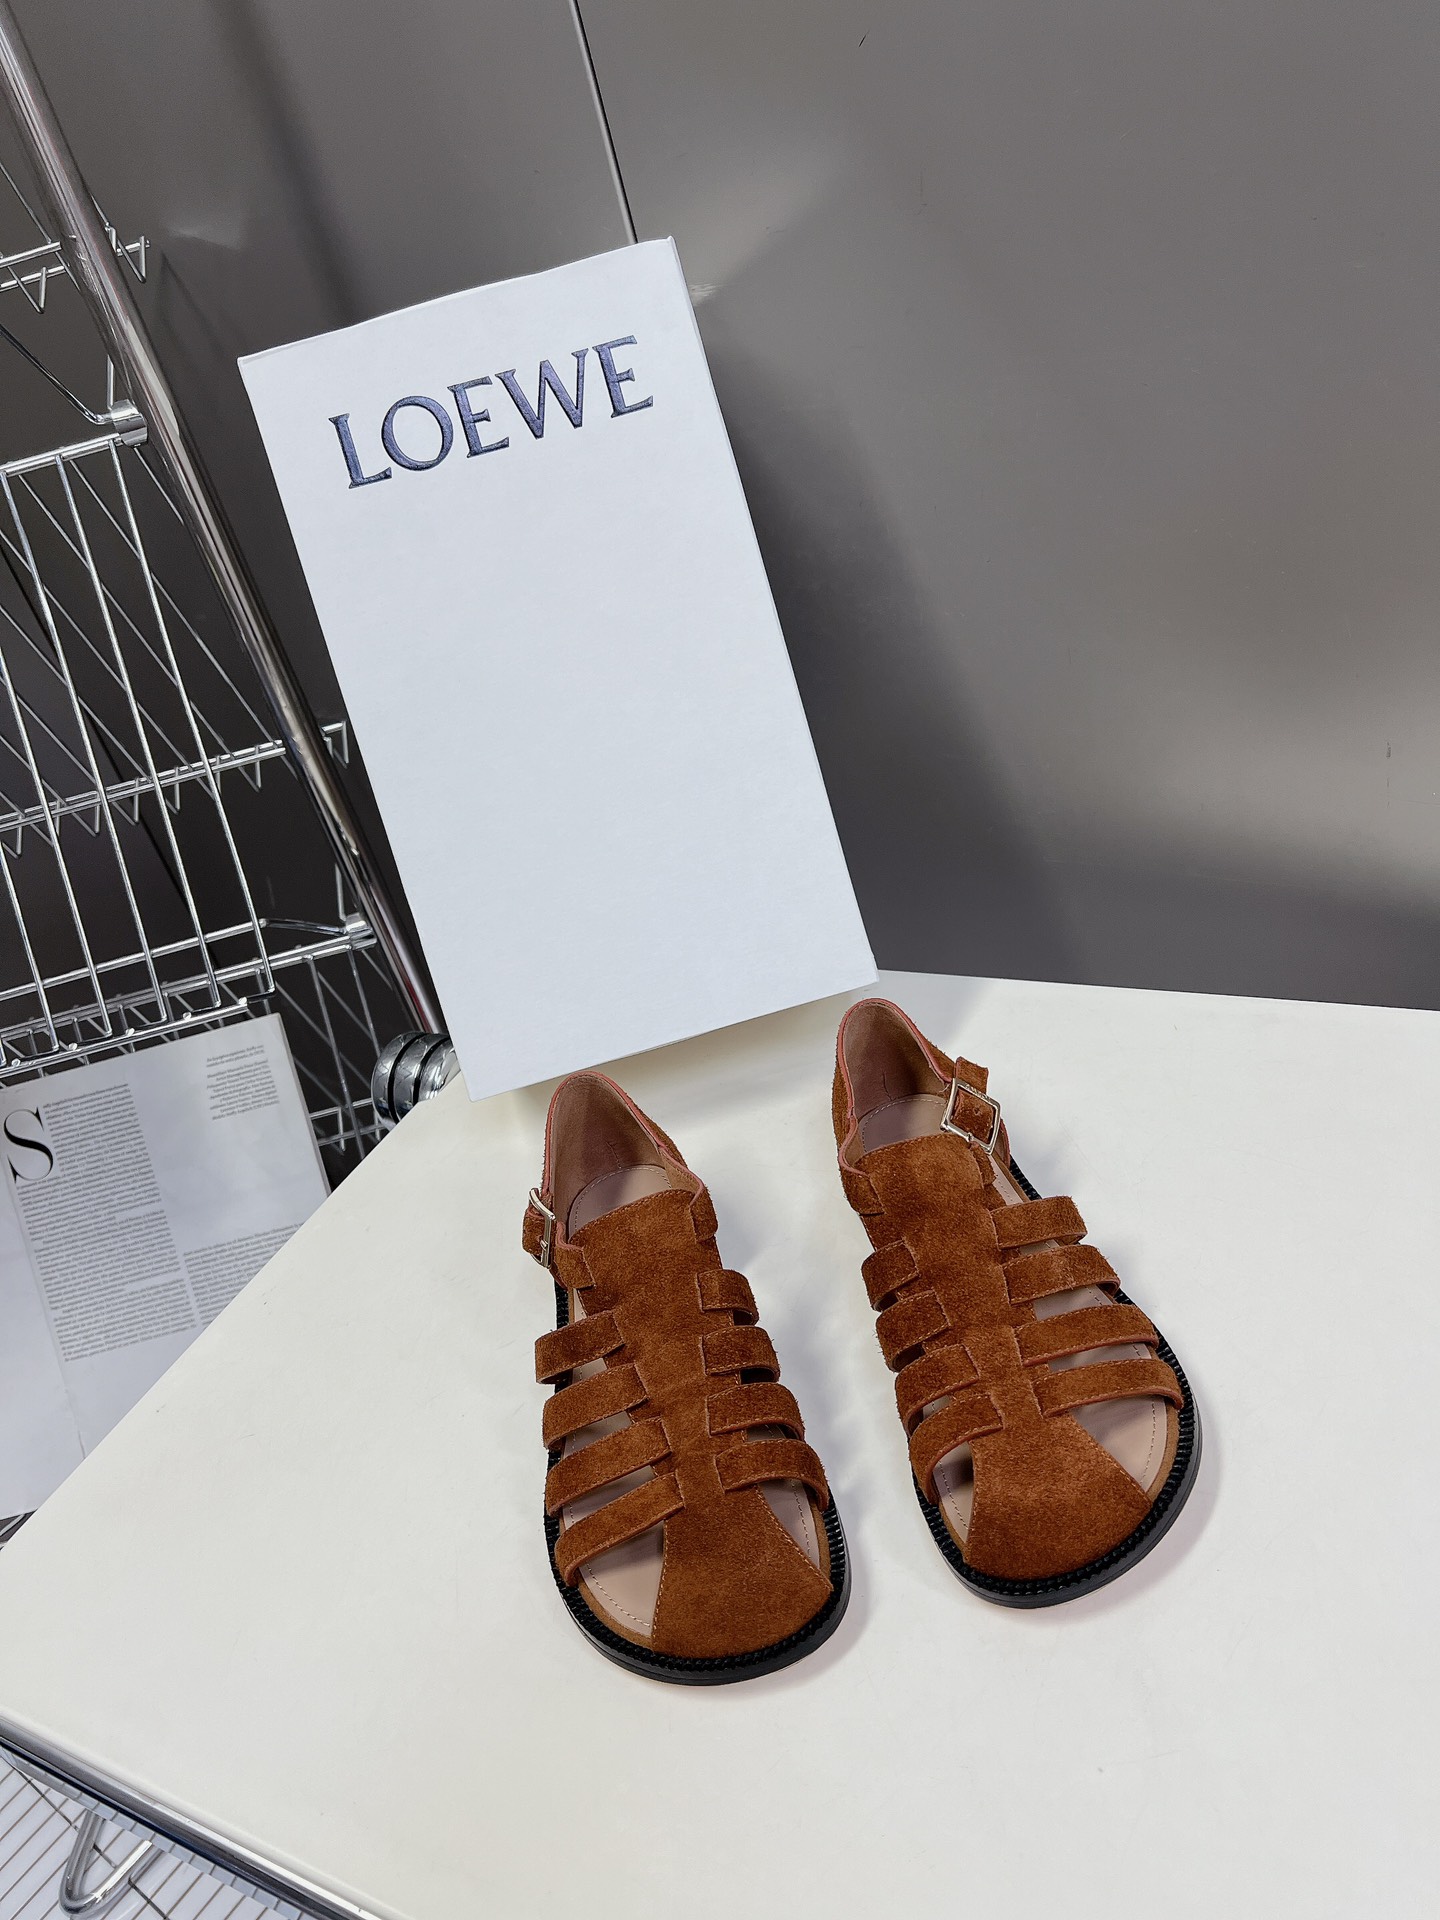 Loewe Shoes Loafers Mules Genuine Leather Spring Collection Vintage